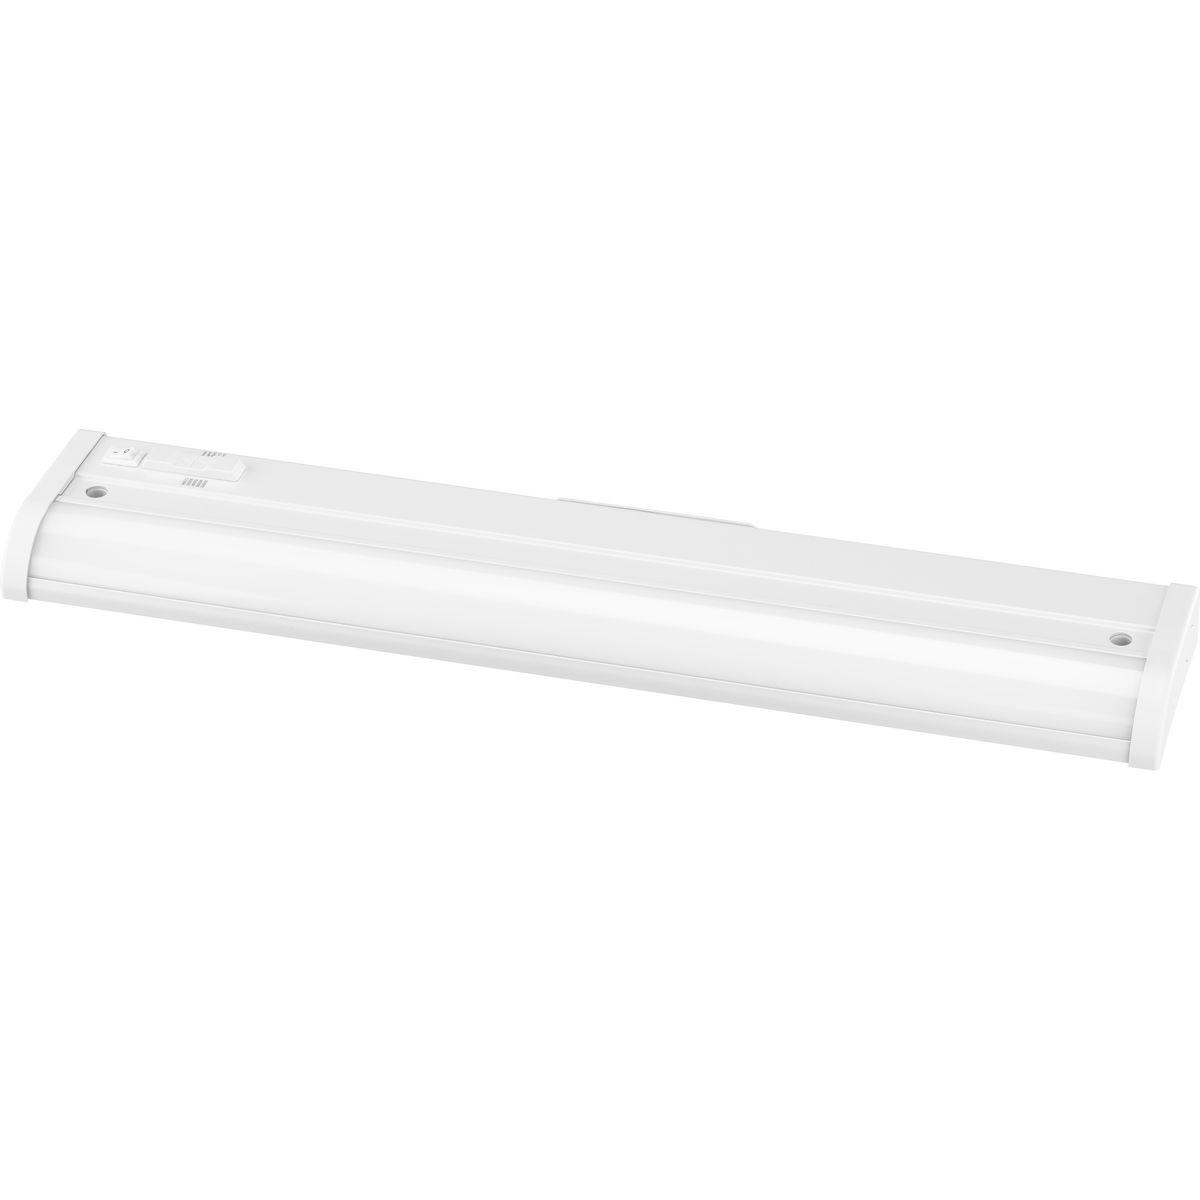 Hubbell P700026-028-CS Combine elegant design with energy-efficient LED light in the Hide-A-Lite Collection 1-Light 18-Inch Satin White Modern LED Linear Undercabinet Light. The fixture's frame is coated in a crisp satin white finish. An access plate and quick connect wire conn